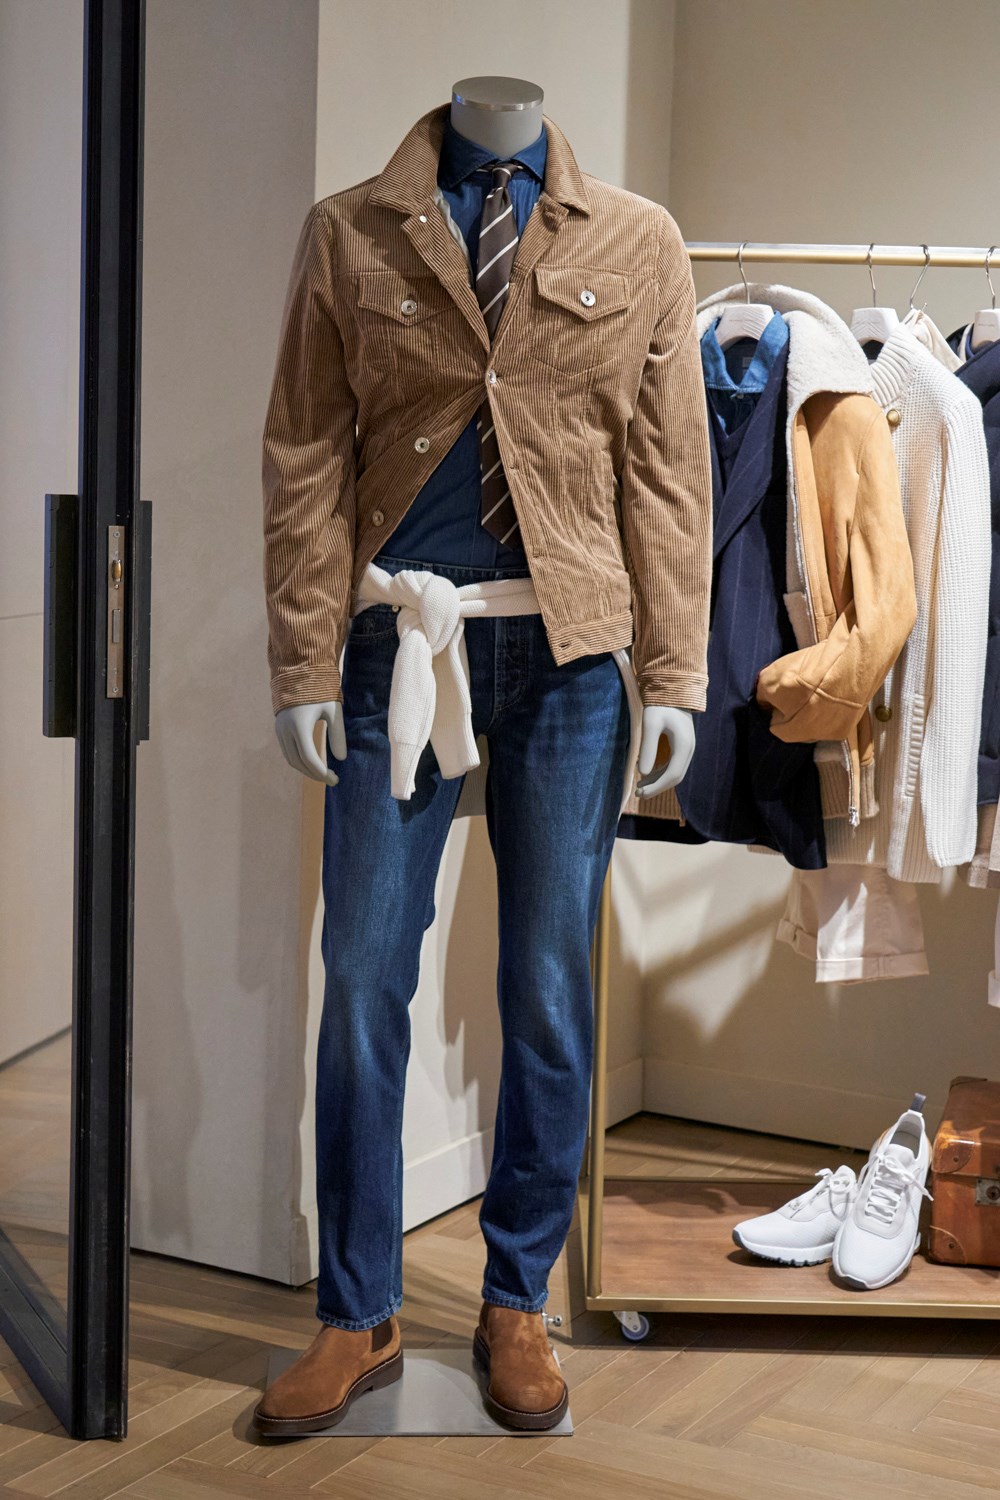 Cucinelli tops forecast with near 30% sales jump in 2022